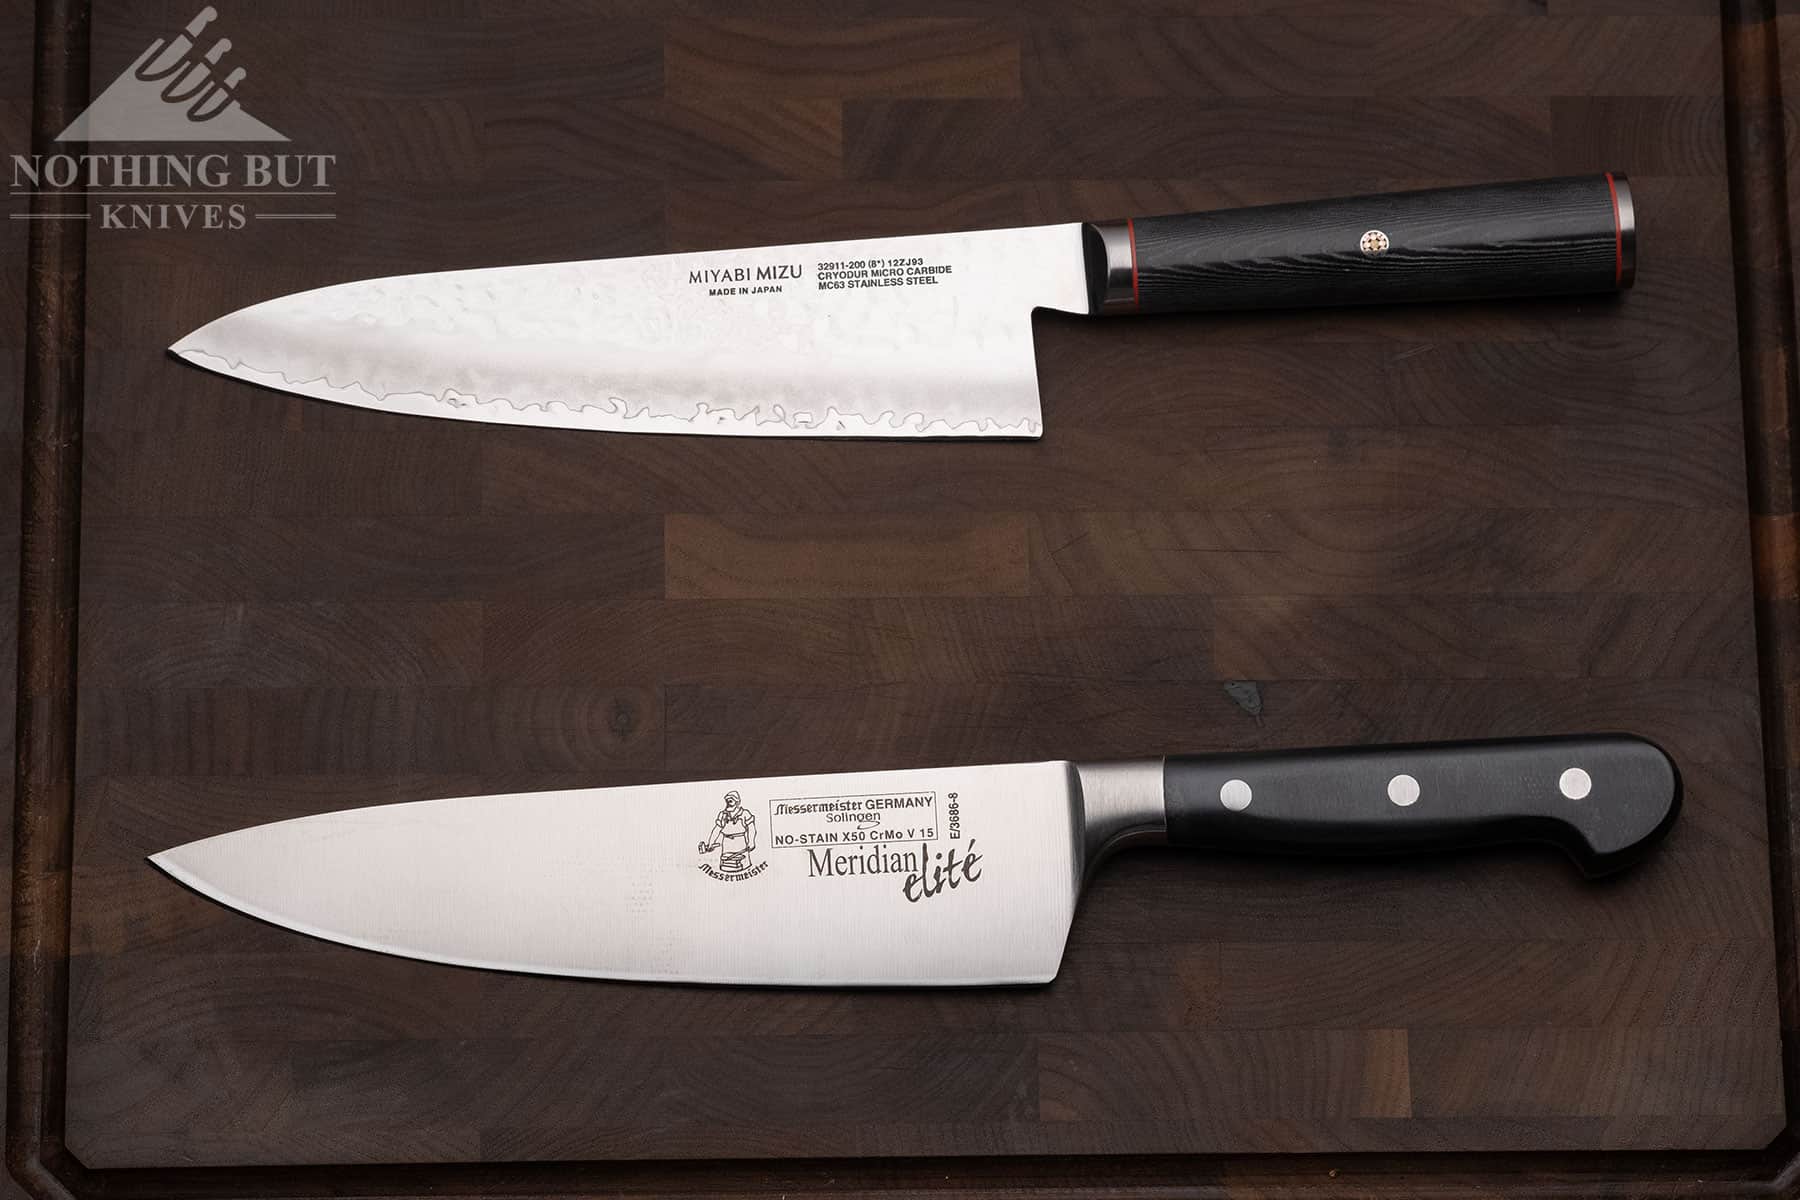 Japanese and Western knives are different, and it is important to learn which type best suits your needs before making a knife set purchase.